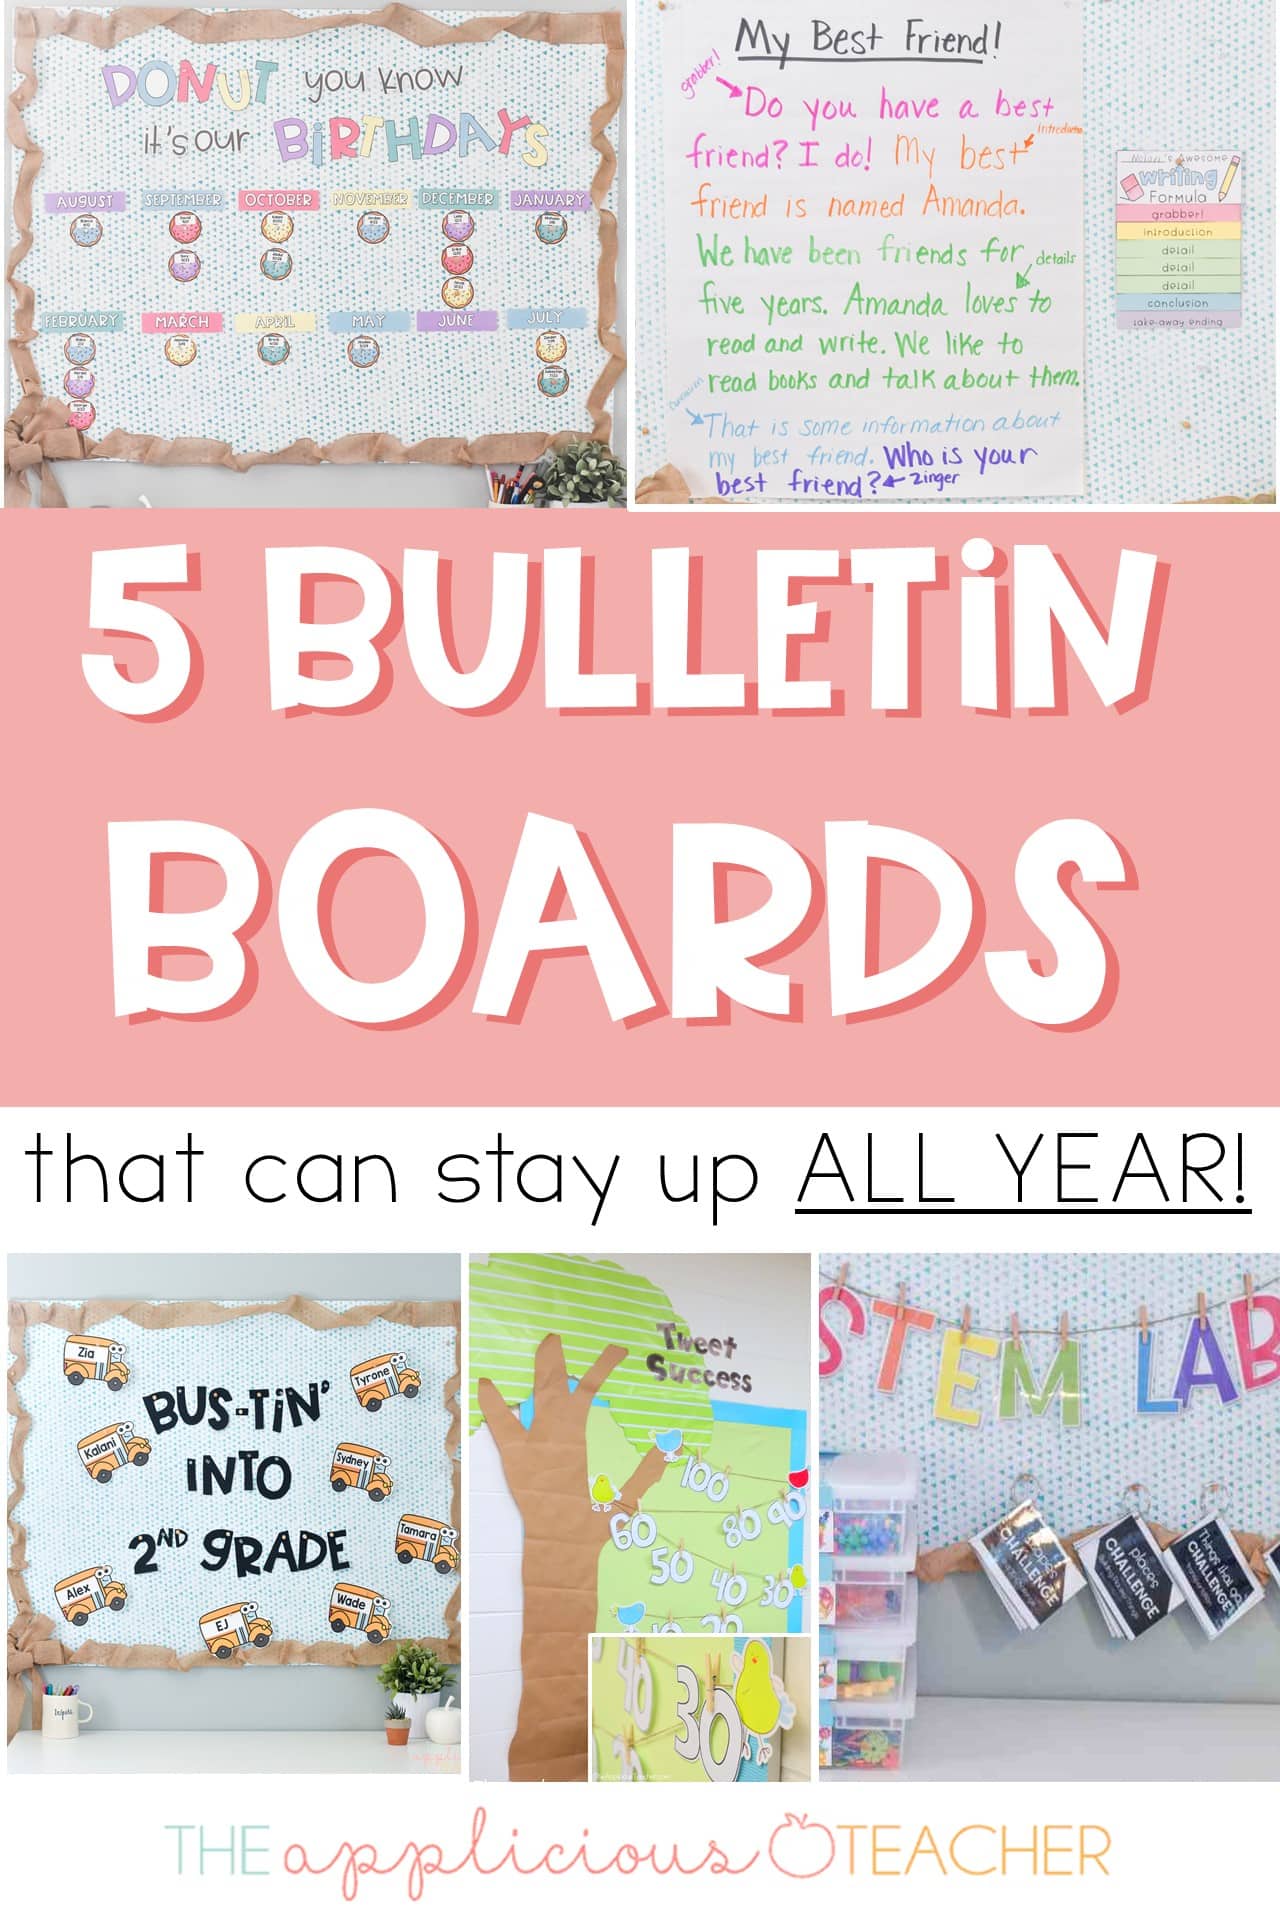 5 Bulletin Boards That You Can Keep Up All Year - The Applicious Teacher